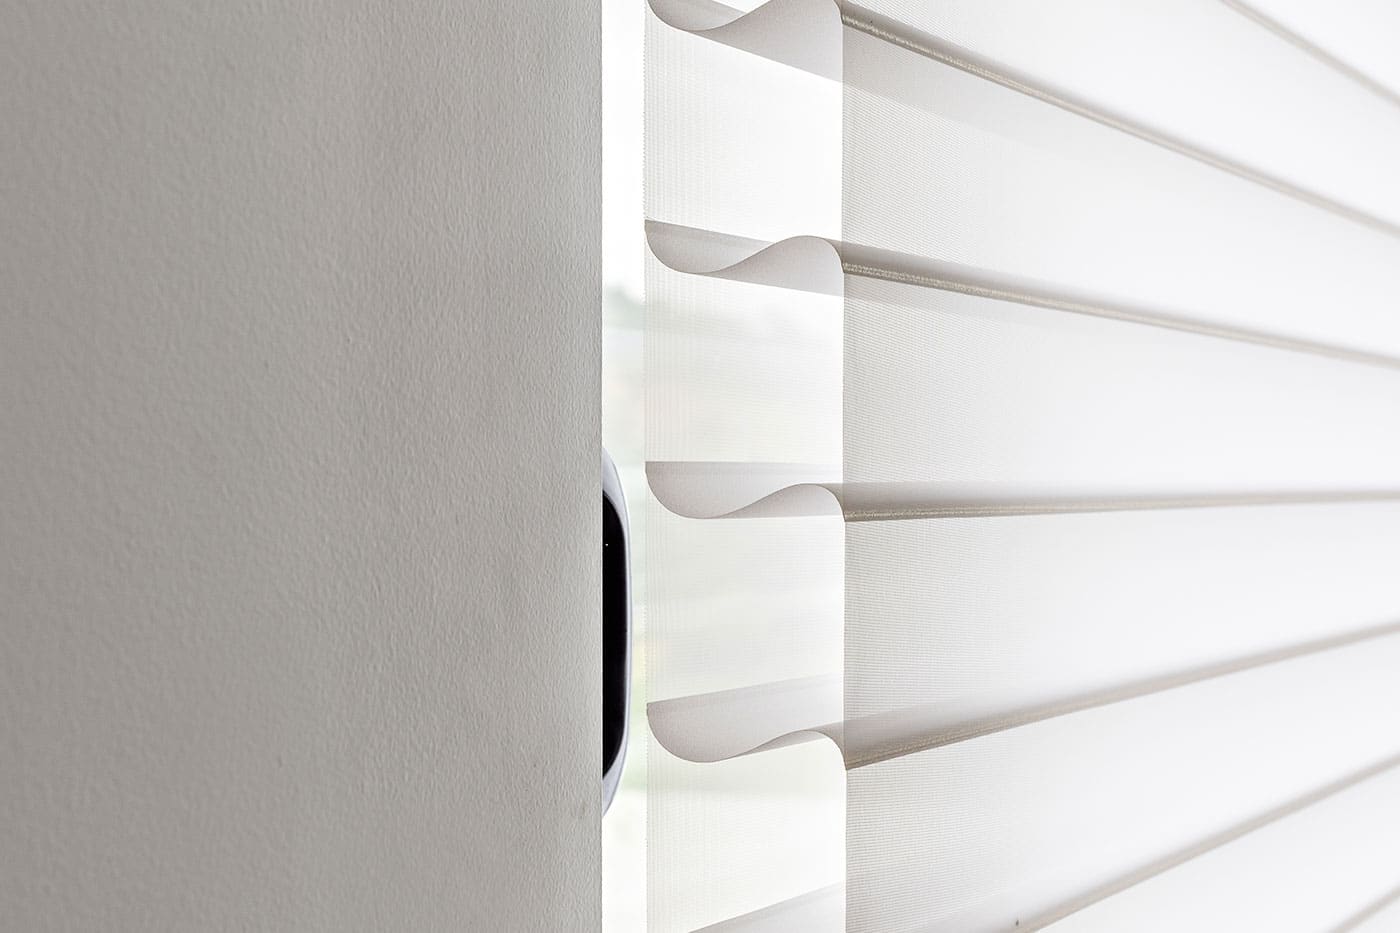 Luxaflex Silhouette Shades with signature S-Vanes diffusing sunlight and naturally brightening the room. Elegant design with UV protection. Available at Complete Blinds Sydney.